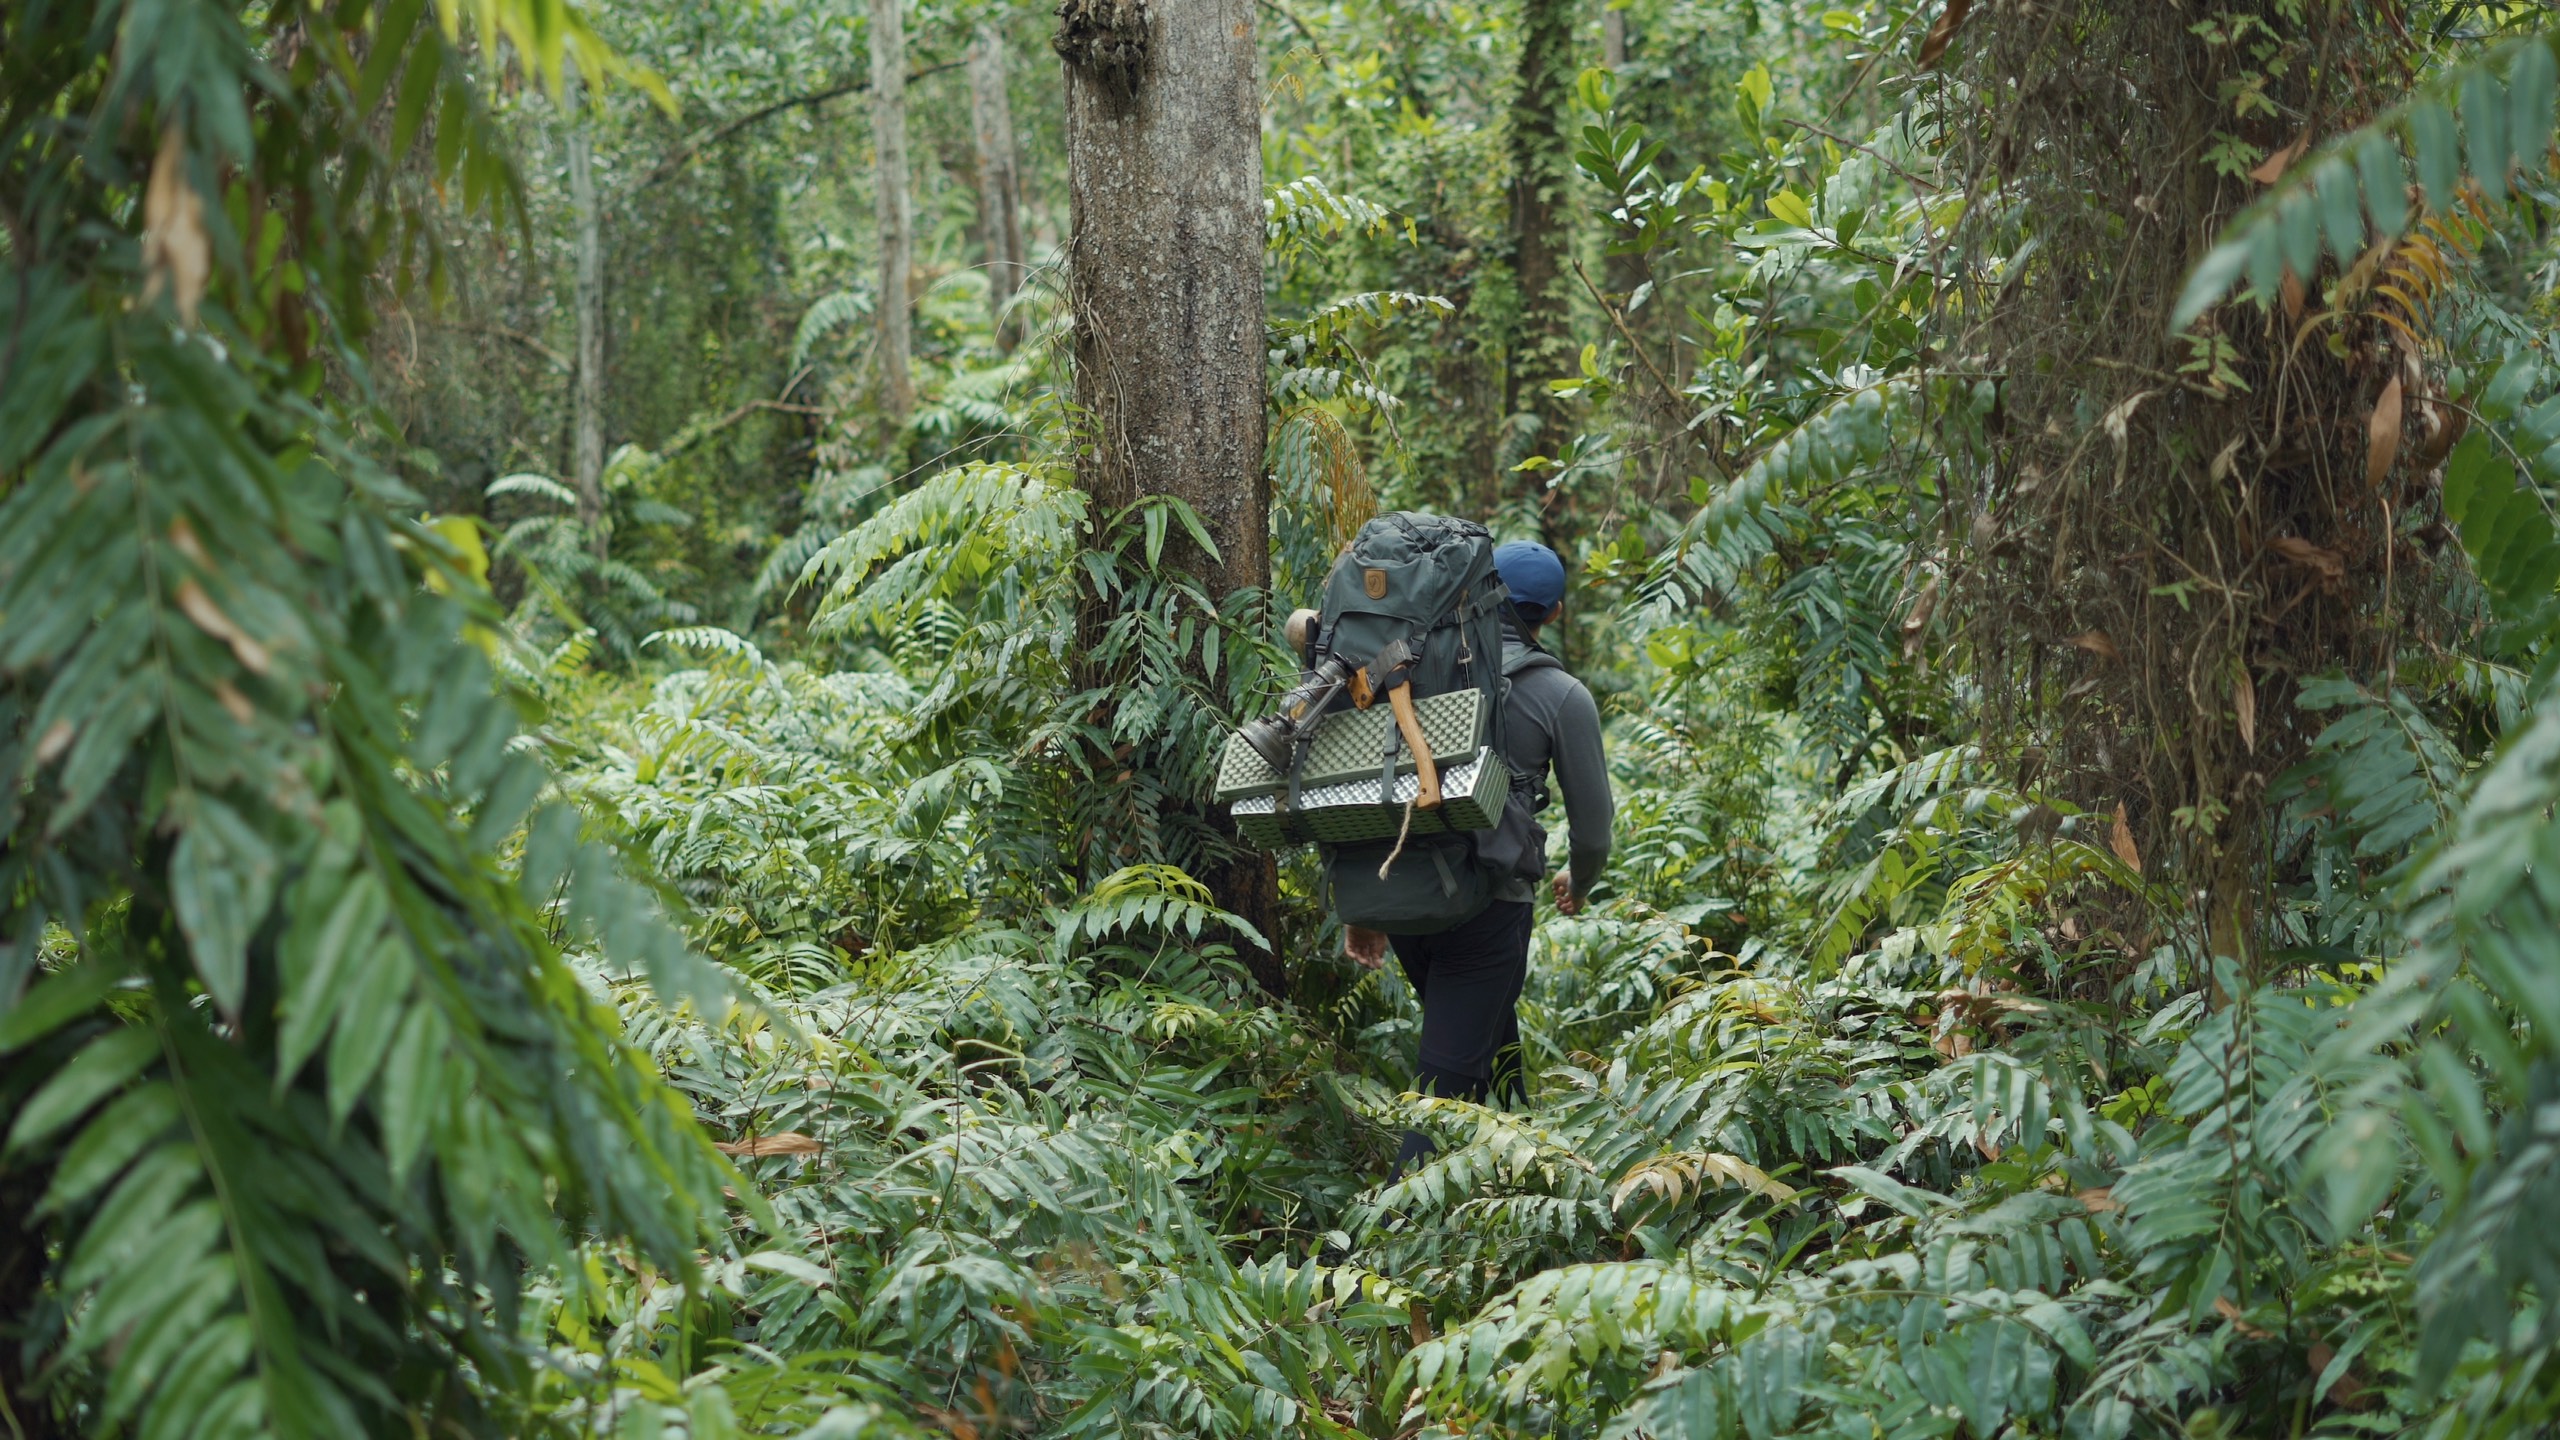 A supplied photo shows Lu Hoang Thong carrying his camping gadgets while walking into the forest alone.